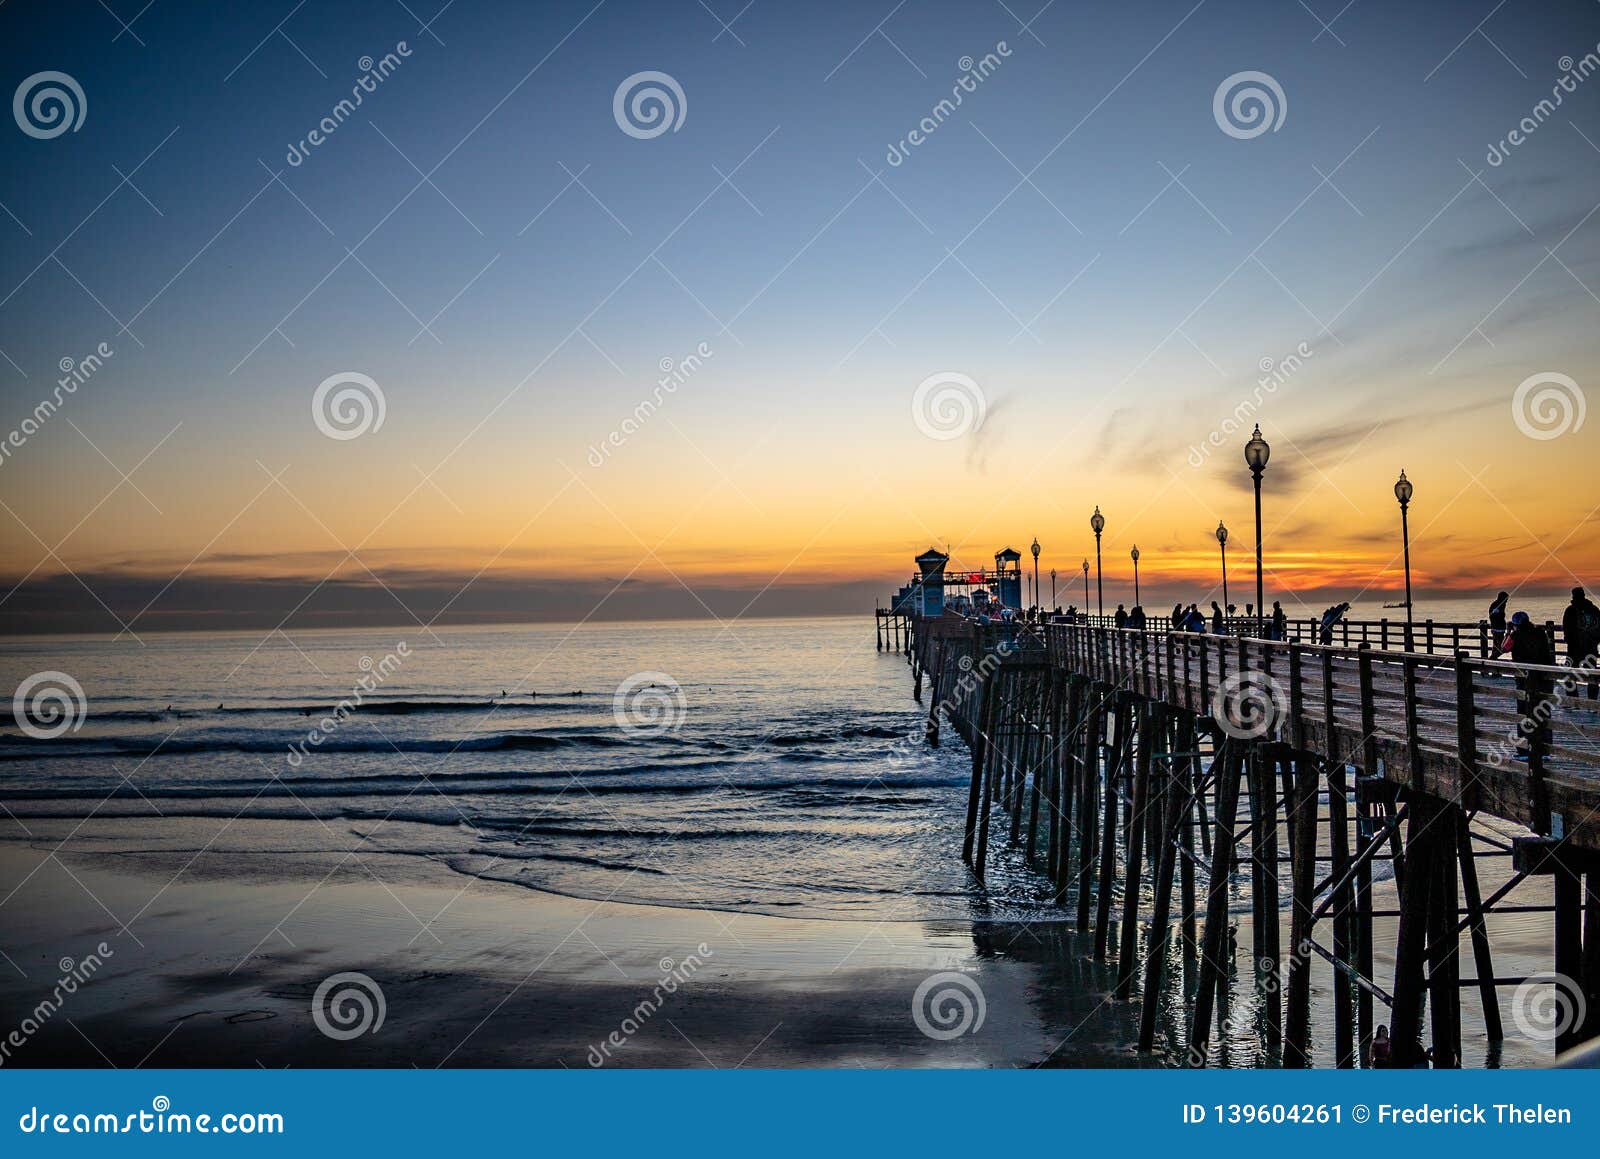 sunset by oceanside pier, palms and the pacific oceanin the famous surf city in california usa